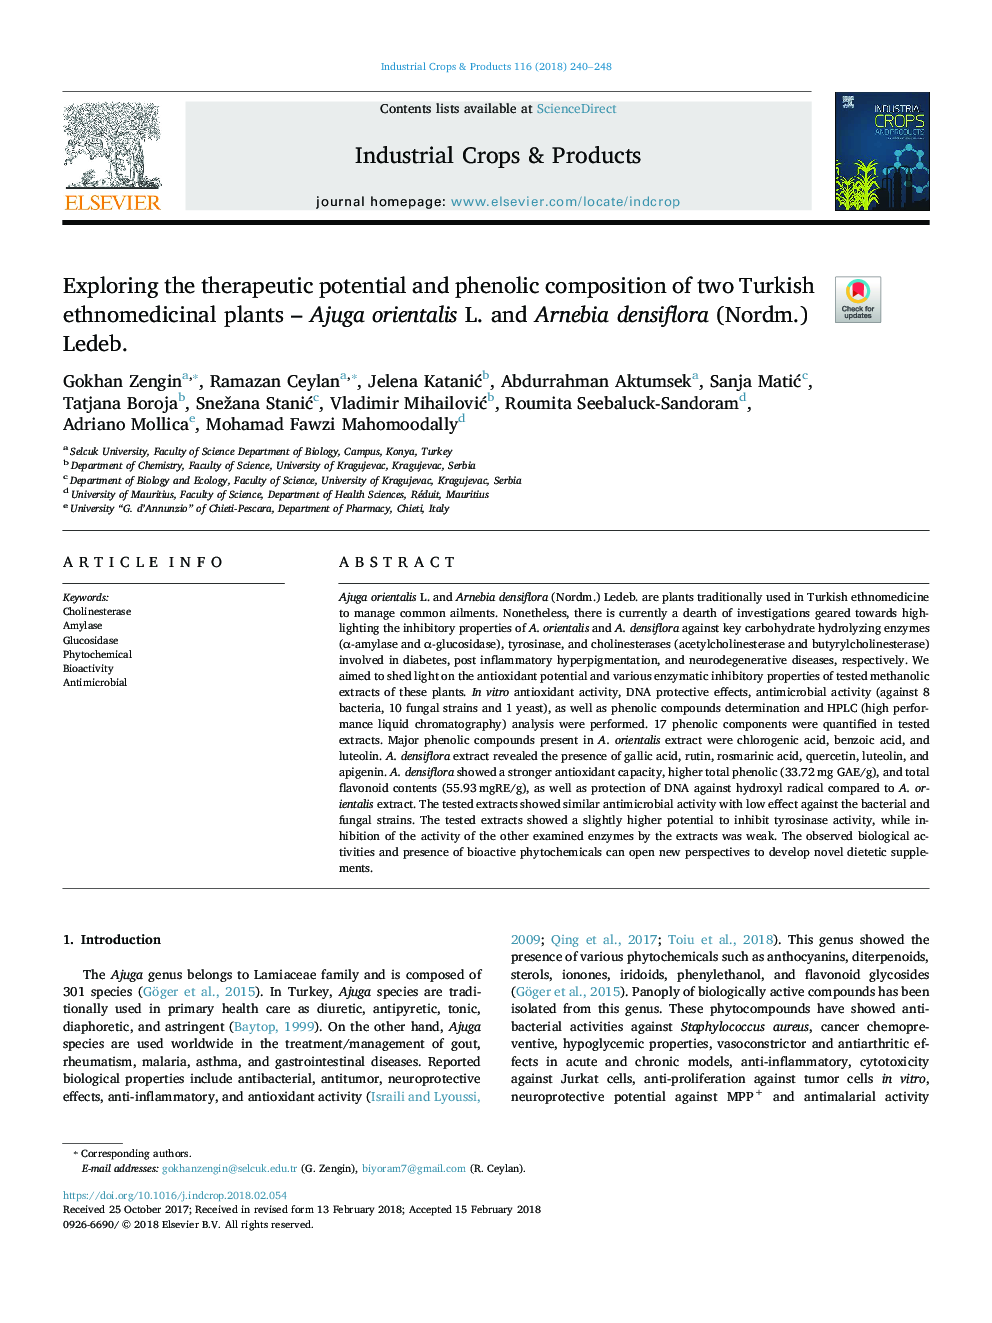 Exploring the therapeutic potential and phenolic composition of two Turkish ethnomedicinal plants - Ajuga orientalis L. and Arnebia densiflora (Nordm.) Ledeb.